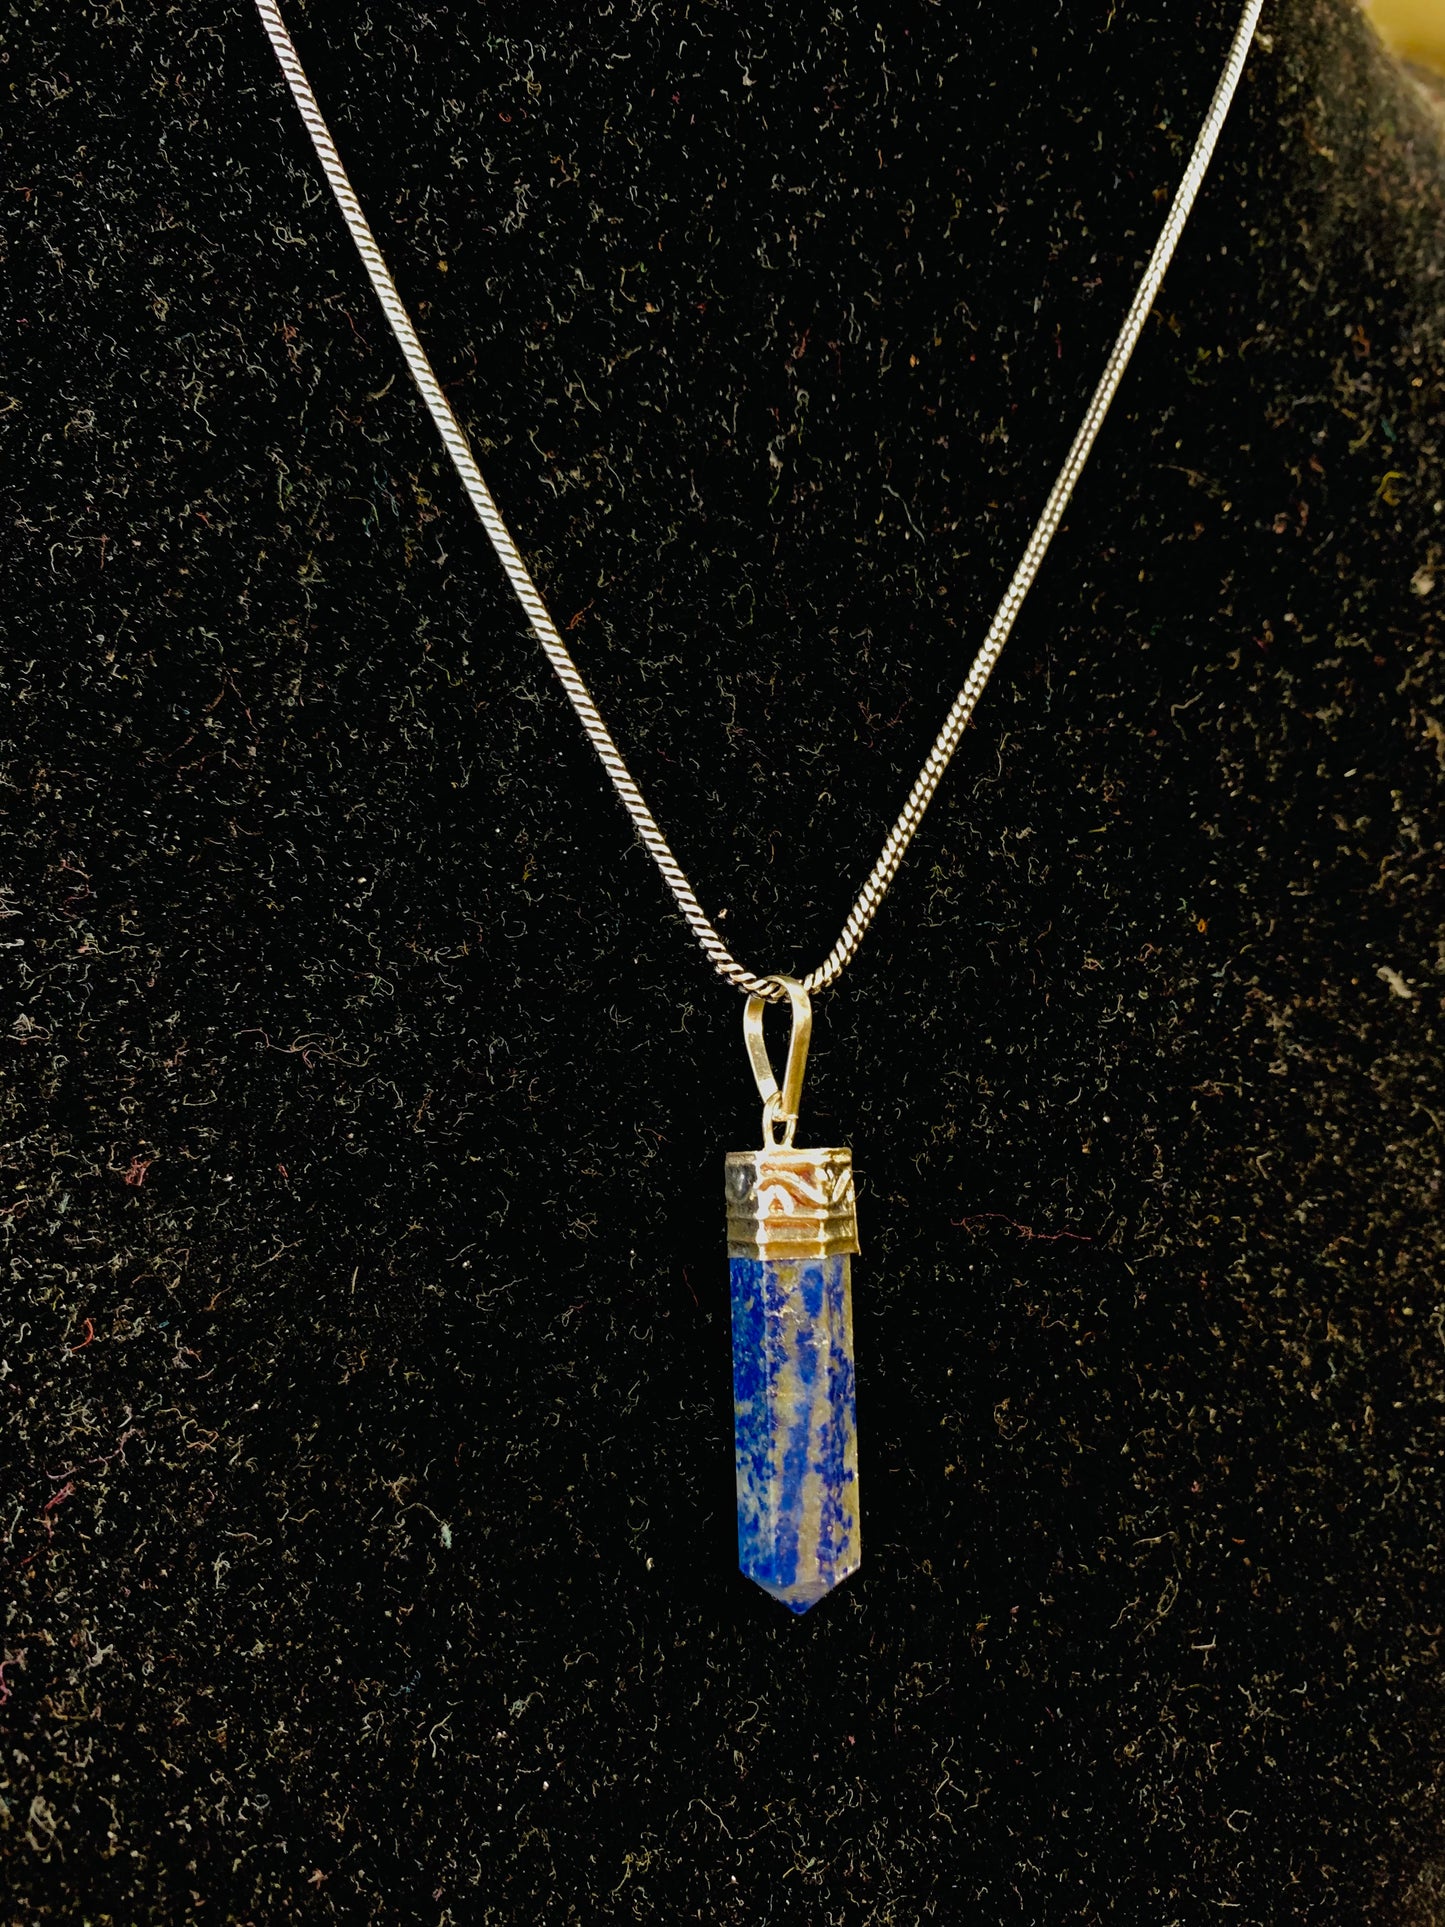 BOHEMIAN STYLE HANDCRAFTED BULLET PENDANT #1700